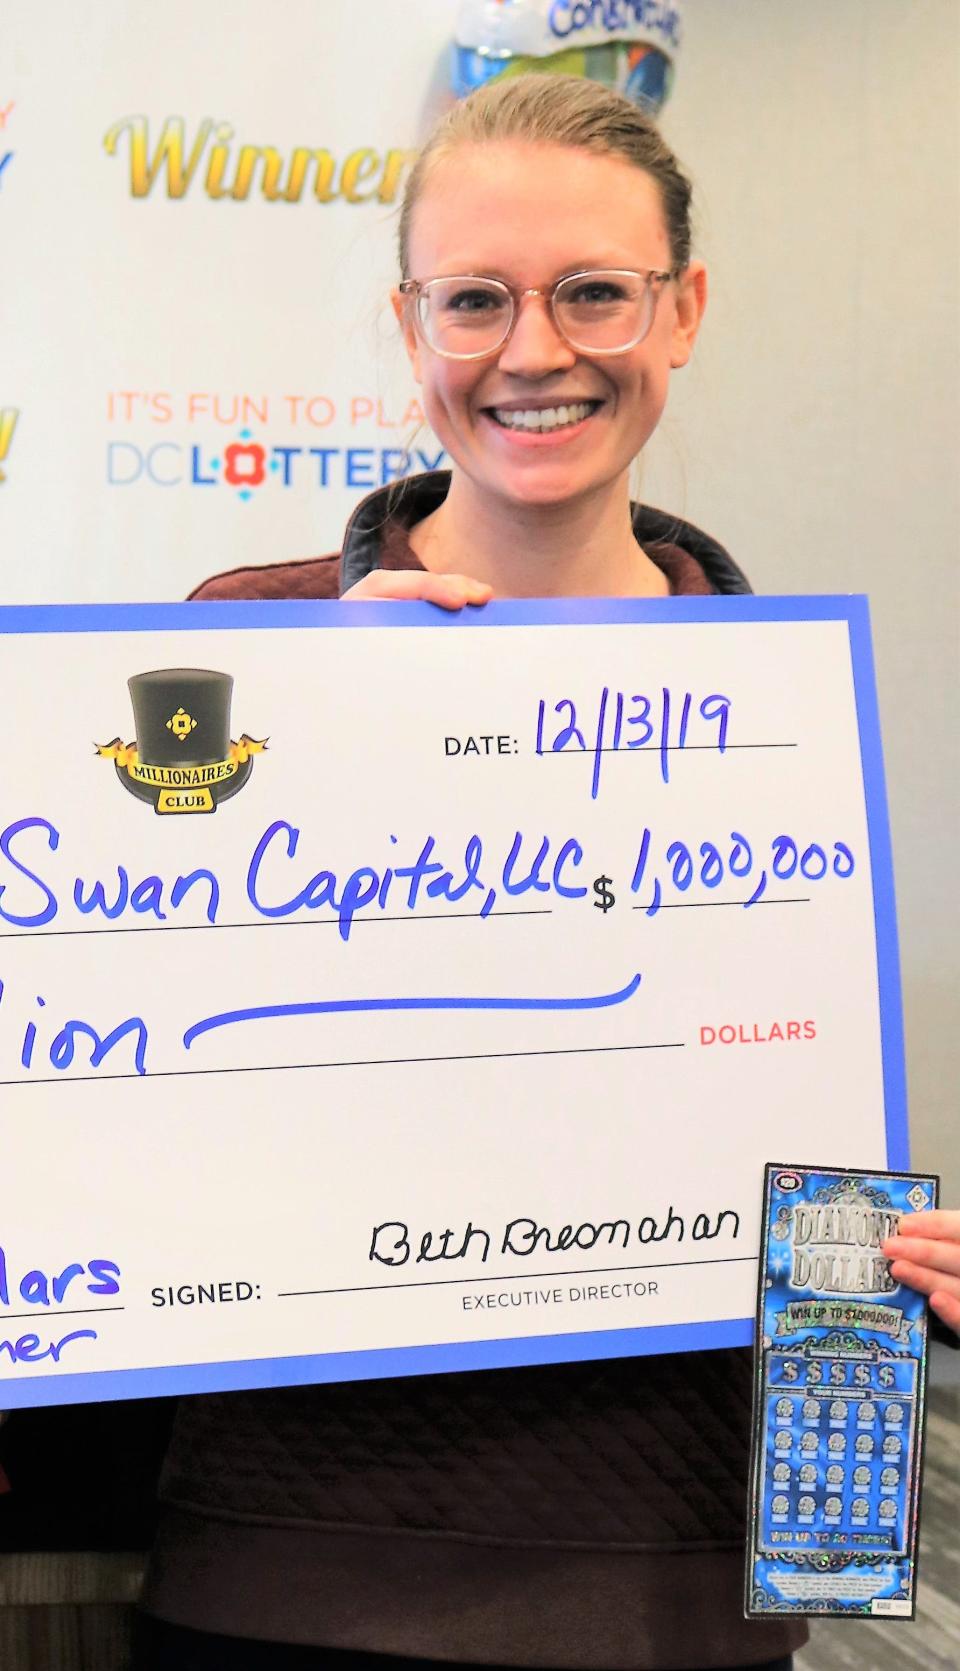 Hannah Davinroy holds a ceremonial check for $1 million after submitting a winning scratch-off ticket to the DC Lottery in December. The prize was paid out to a corporation called Black Swan Capital, LLC, which was established last year by two of her former classmates at Princeton University. The trio has won more than $6 million from scratch-off games from at least four different lotteries in the last 18 months.